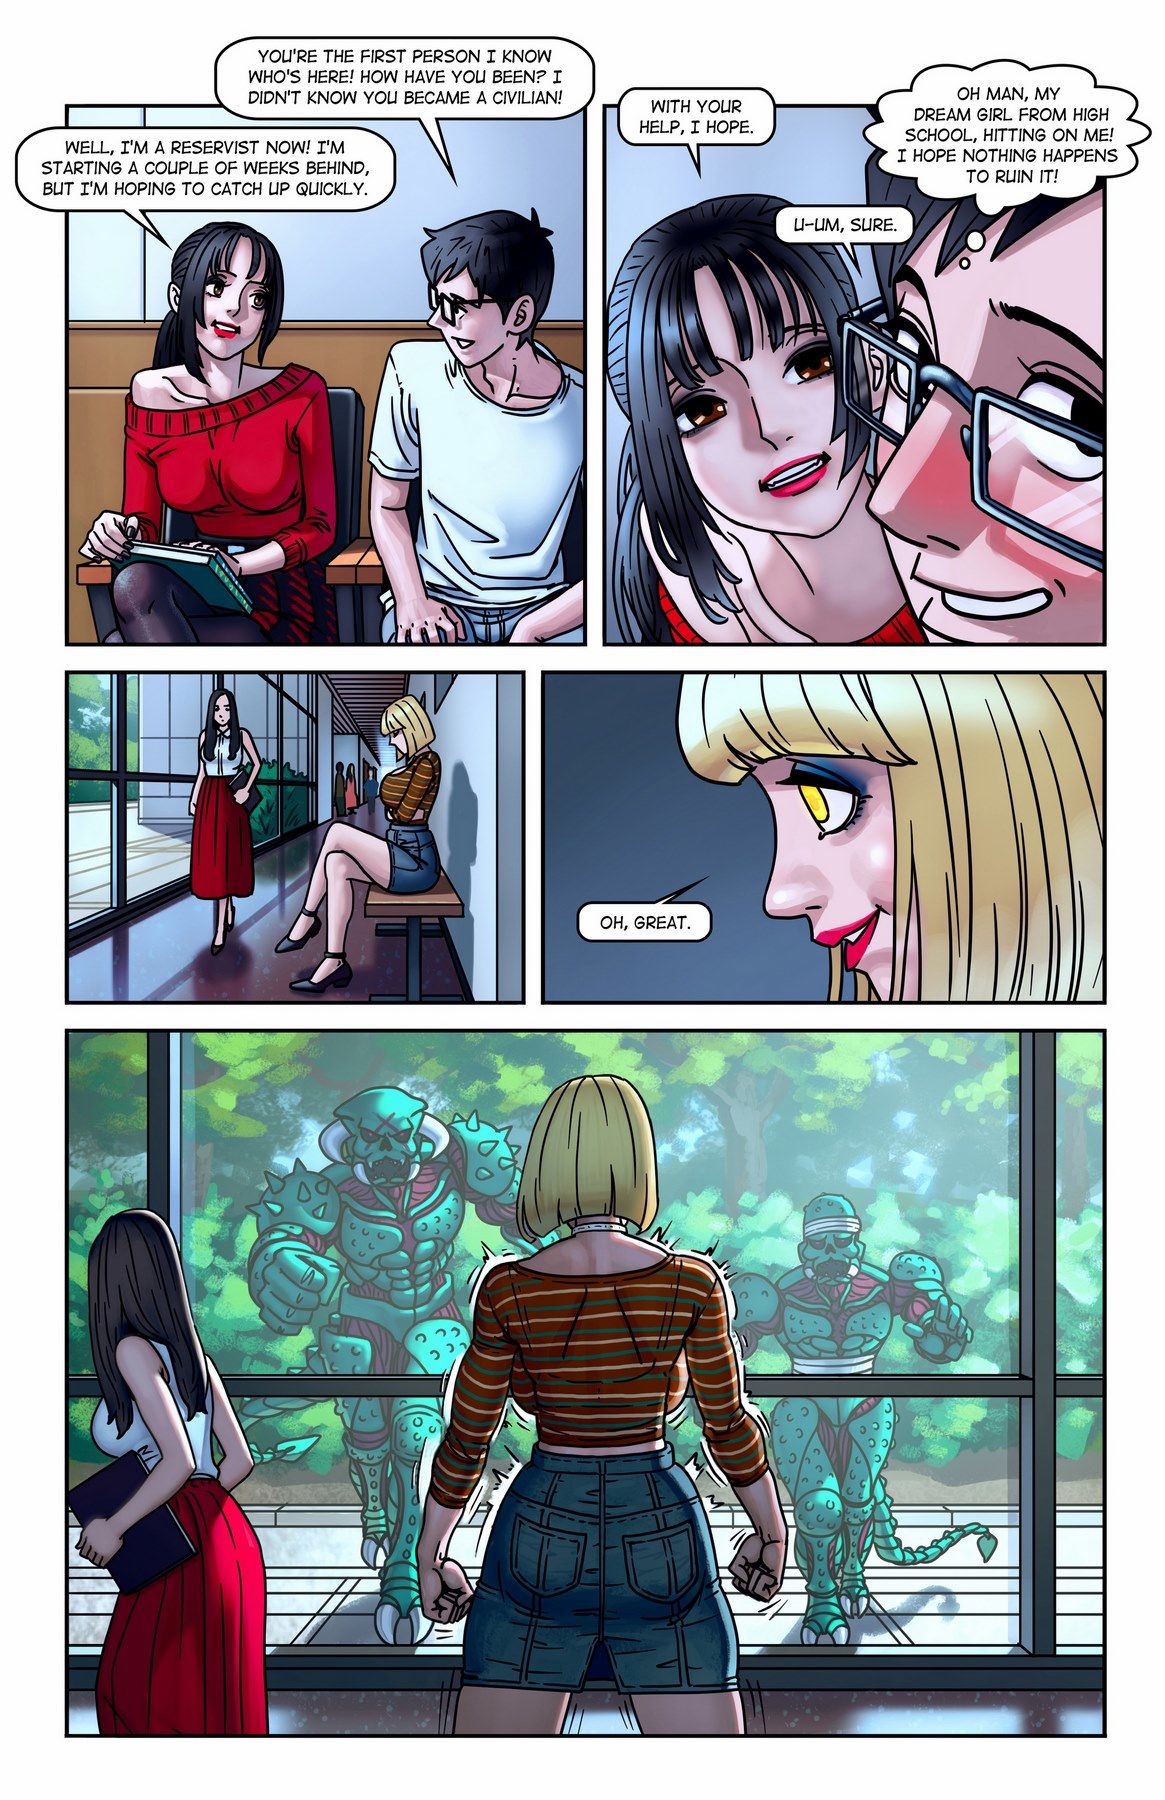 Maid of Honor Issue 02 MuscleFan page 7.